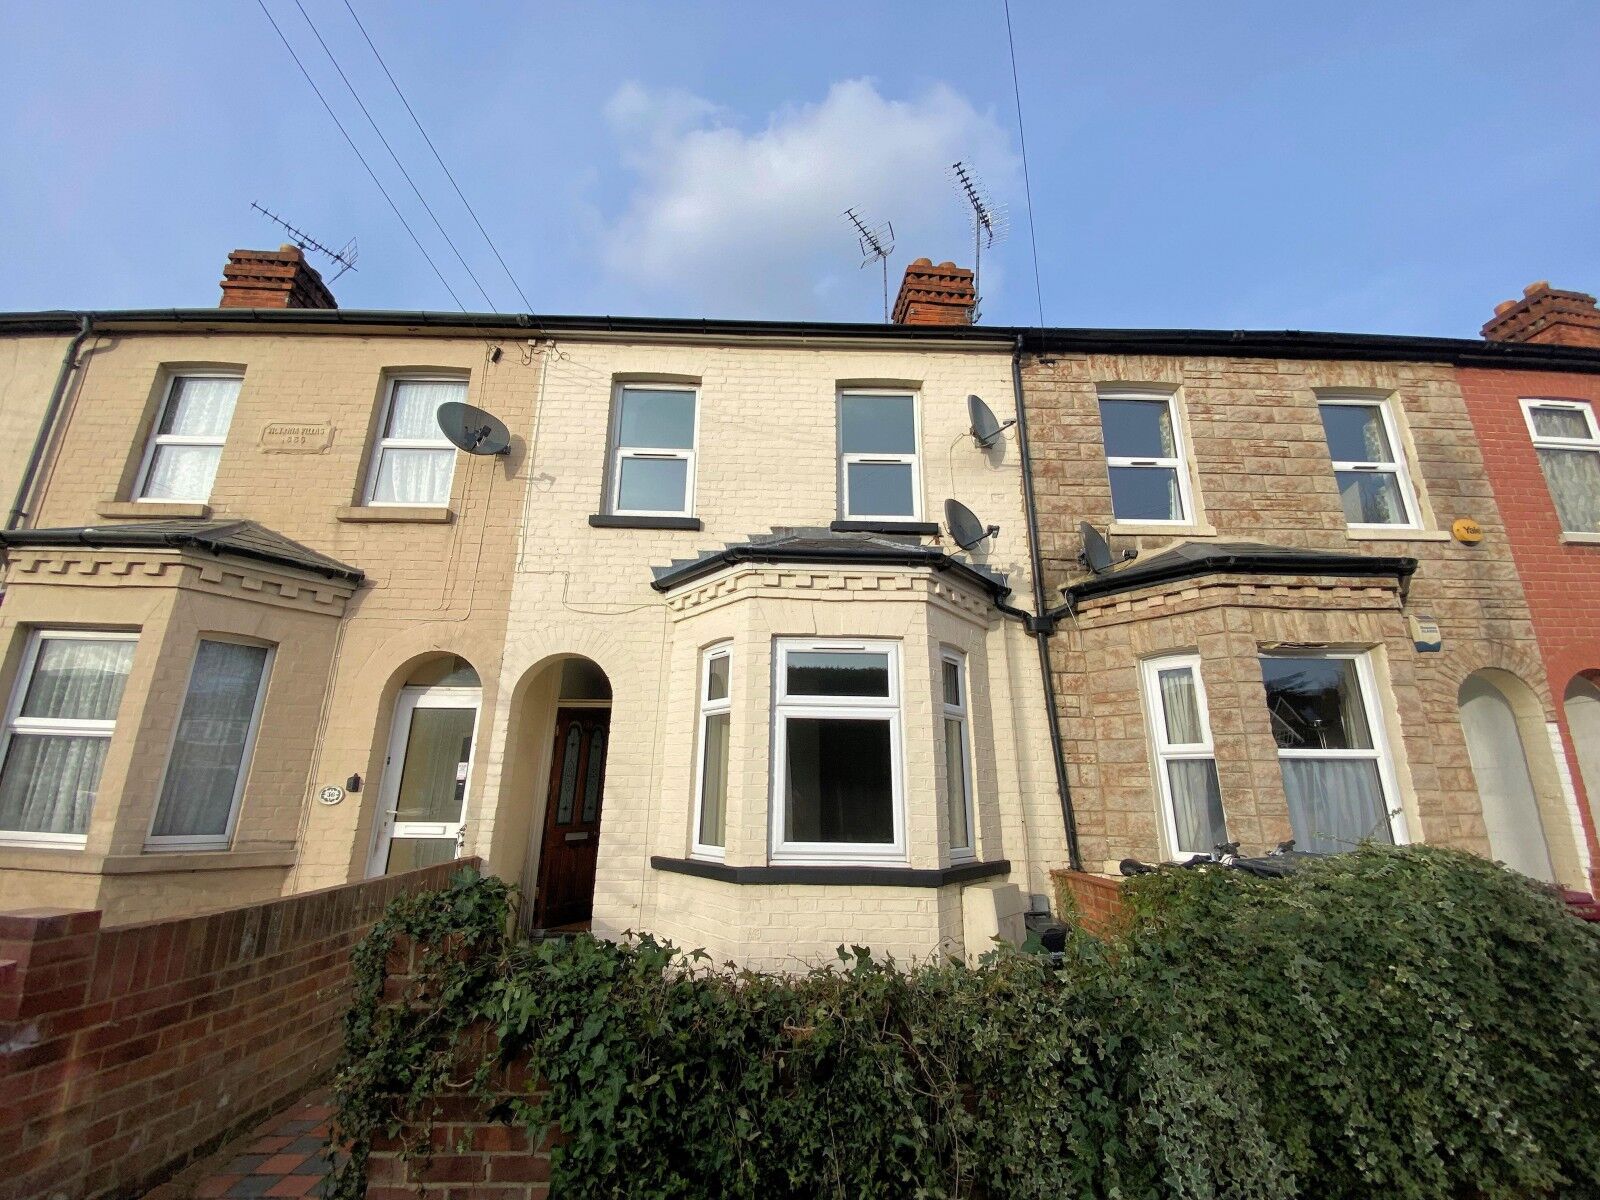 3 bedroom mid terraced house for sale Prince Of Wales Avenue, Reading, RG30, main image